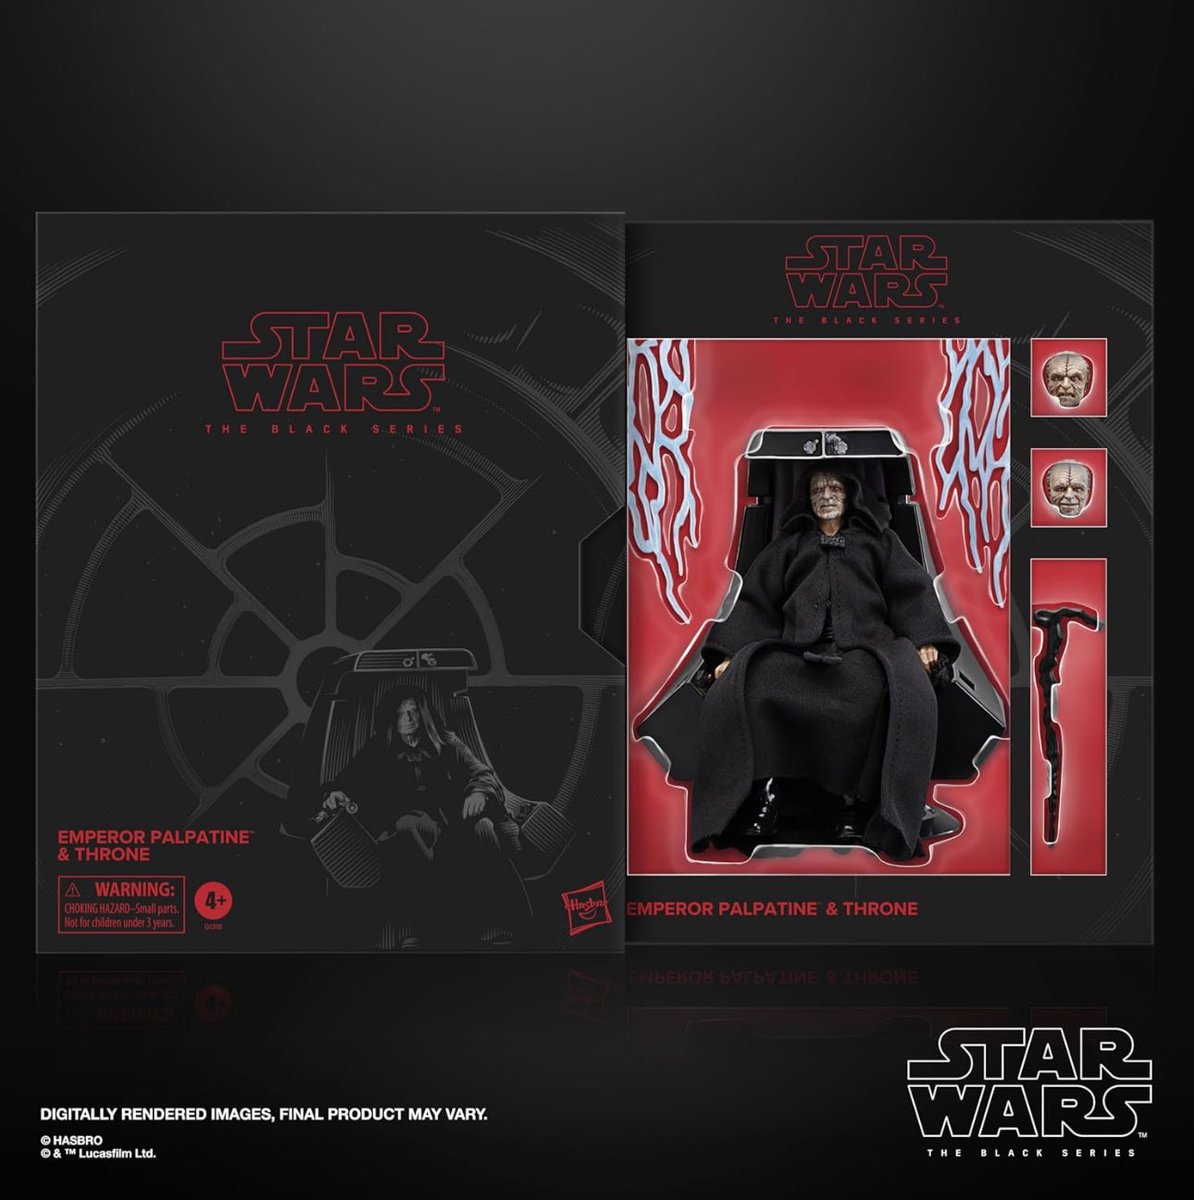 Preorder Now: Amazon Exclusive Star Wars The Black Series Emperor Palpatine & Throne Return of The Jedi Collectible 6 Inch Action Figure

Link: amzn.to/4a9vpXY

#Ad #StarWars #RevengeOfThe5th #Maythe4thBeWithYou #MayTheFourthBeWithYou